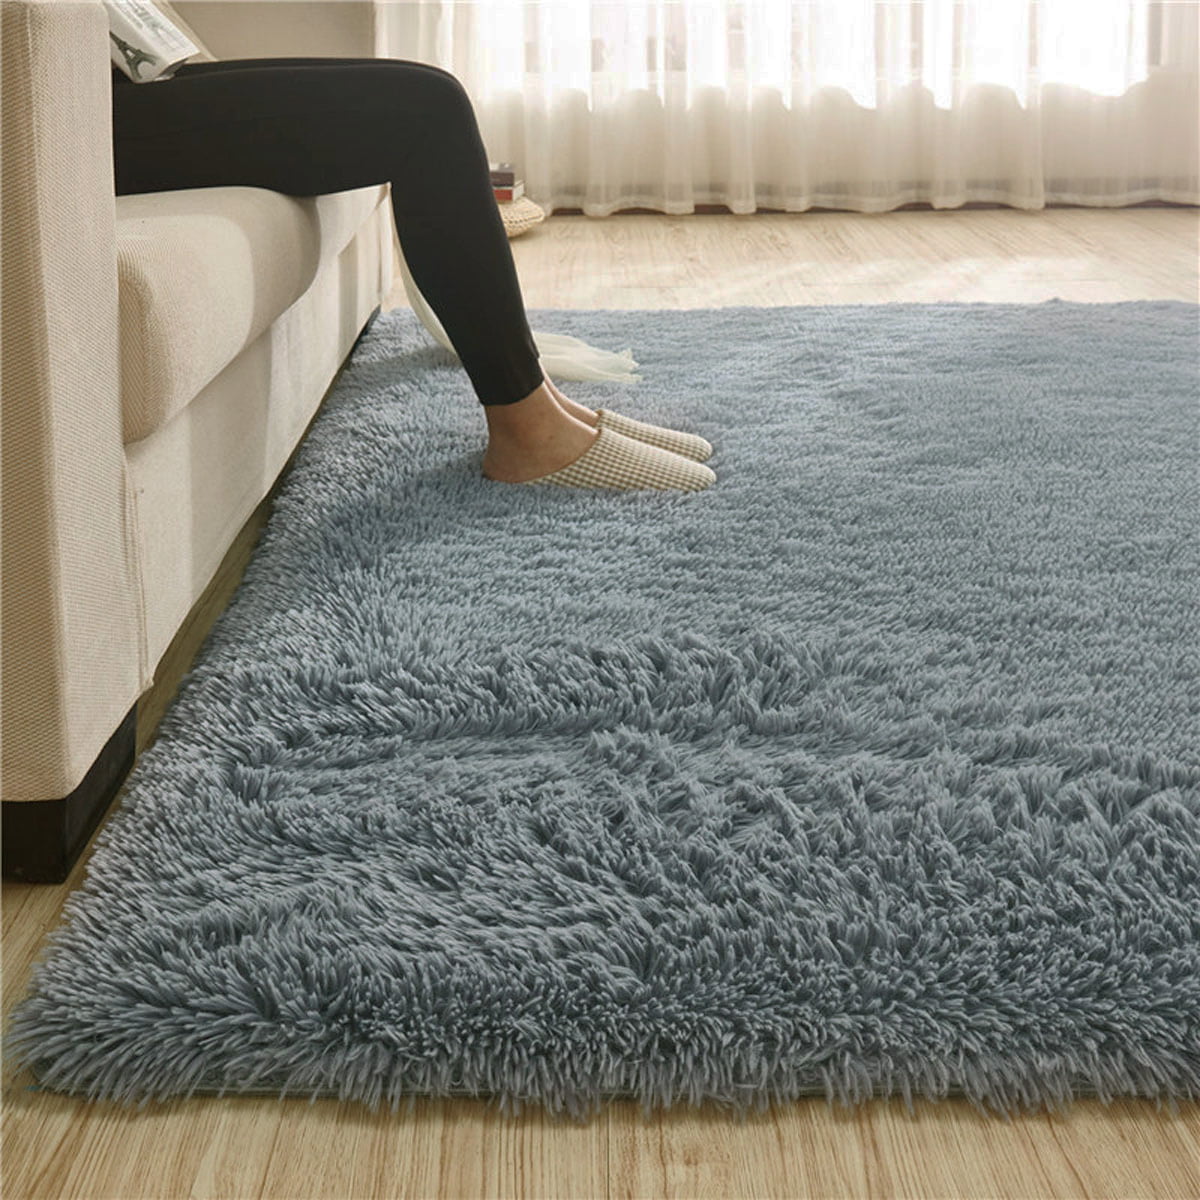 Coral Fleece Area Rugs Soft Non Slip Floor Carpet Comfy Accent Rugs Machine Washable Indoor Home Decor for Living Room Bedroom Sofa Colorful Space 72x48in 